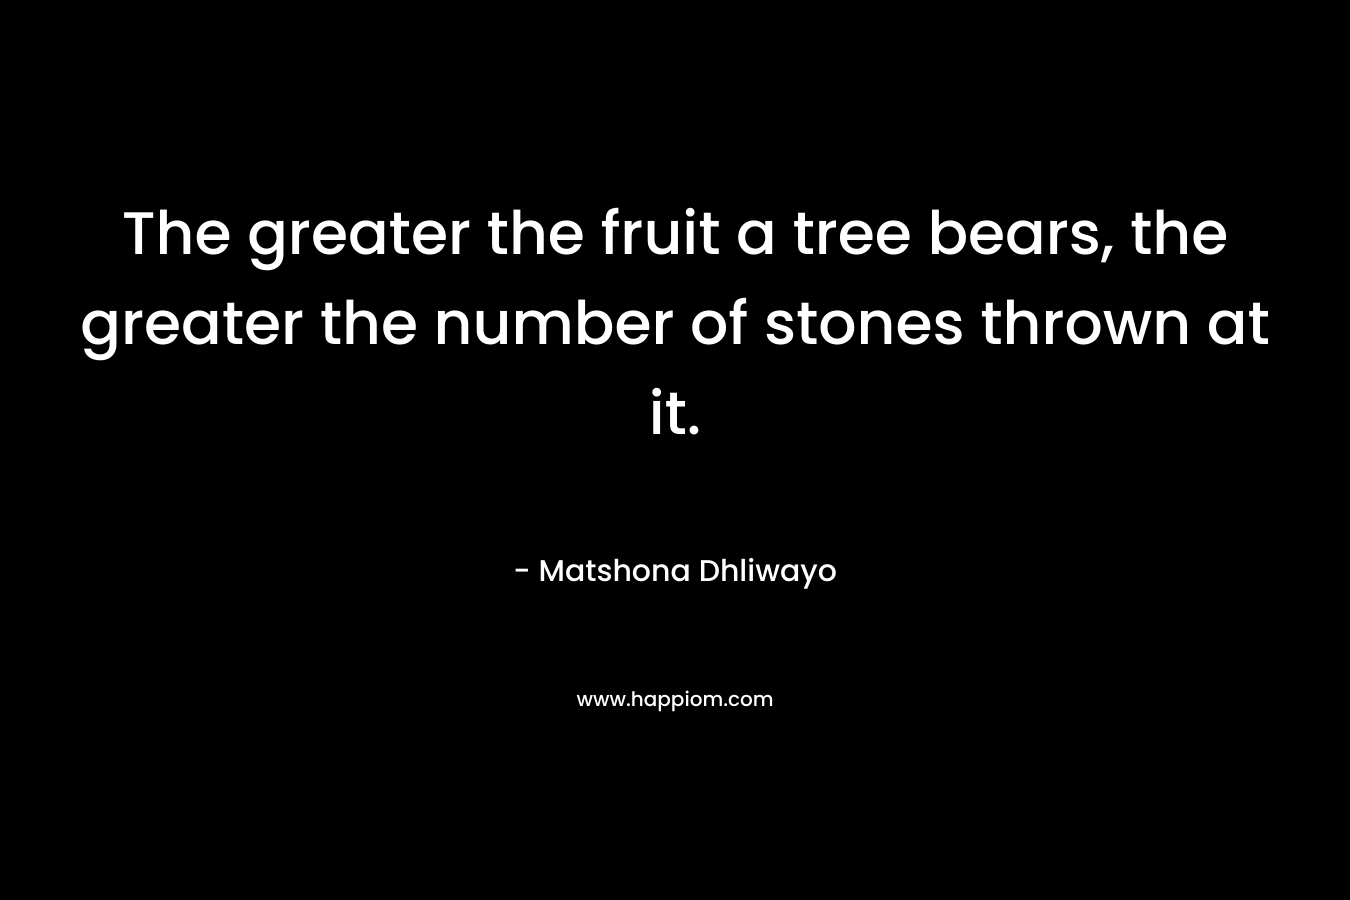 The greater the fruit a tree bears, the greater the number of stones thrown at it.